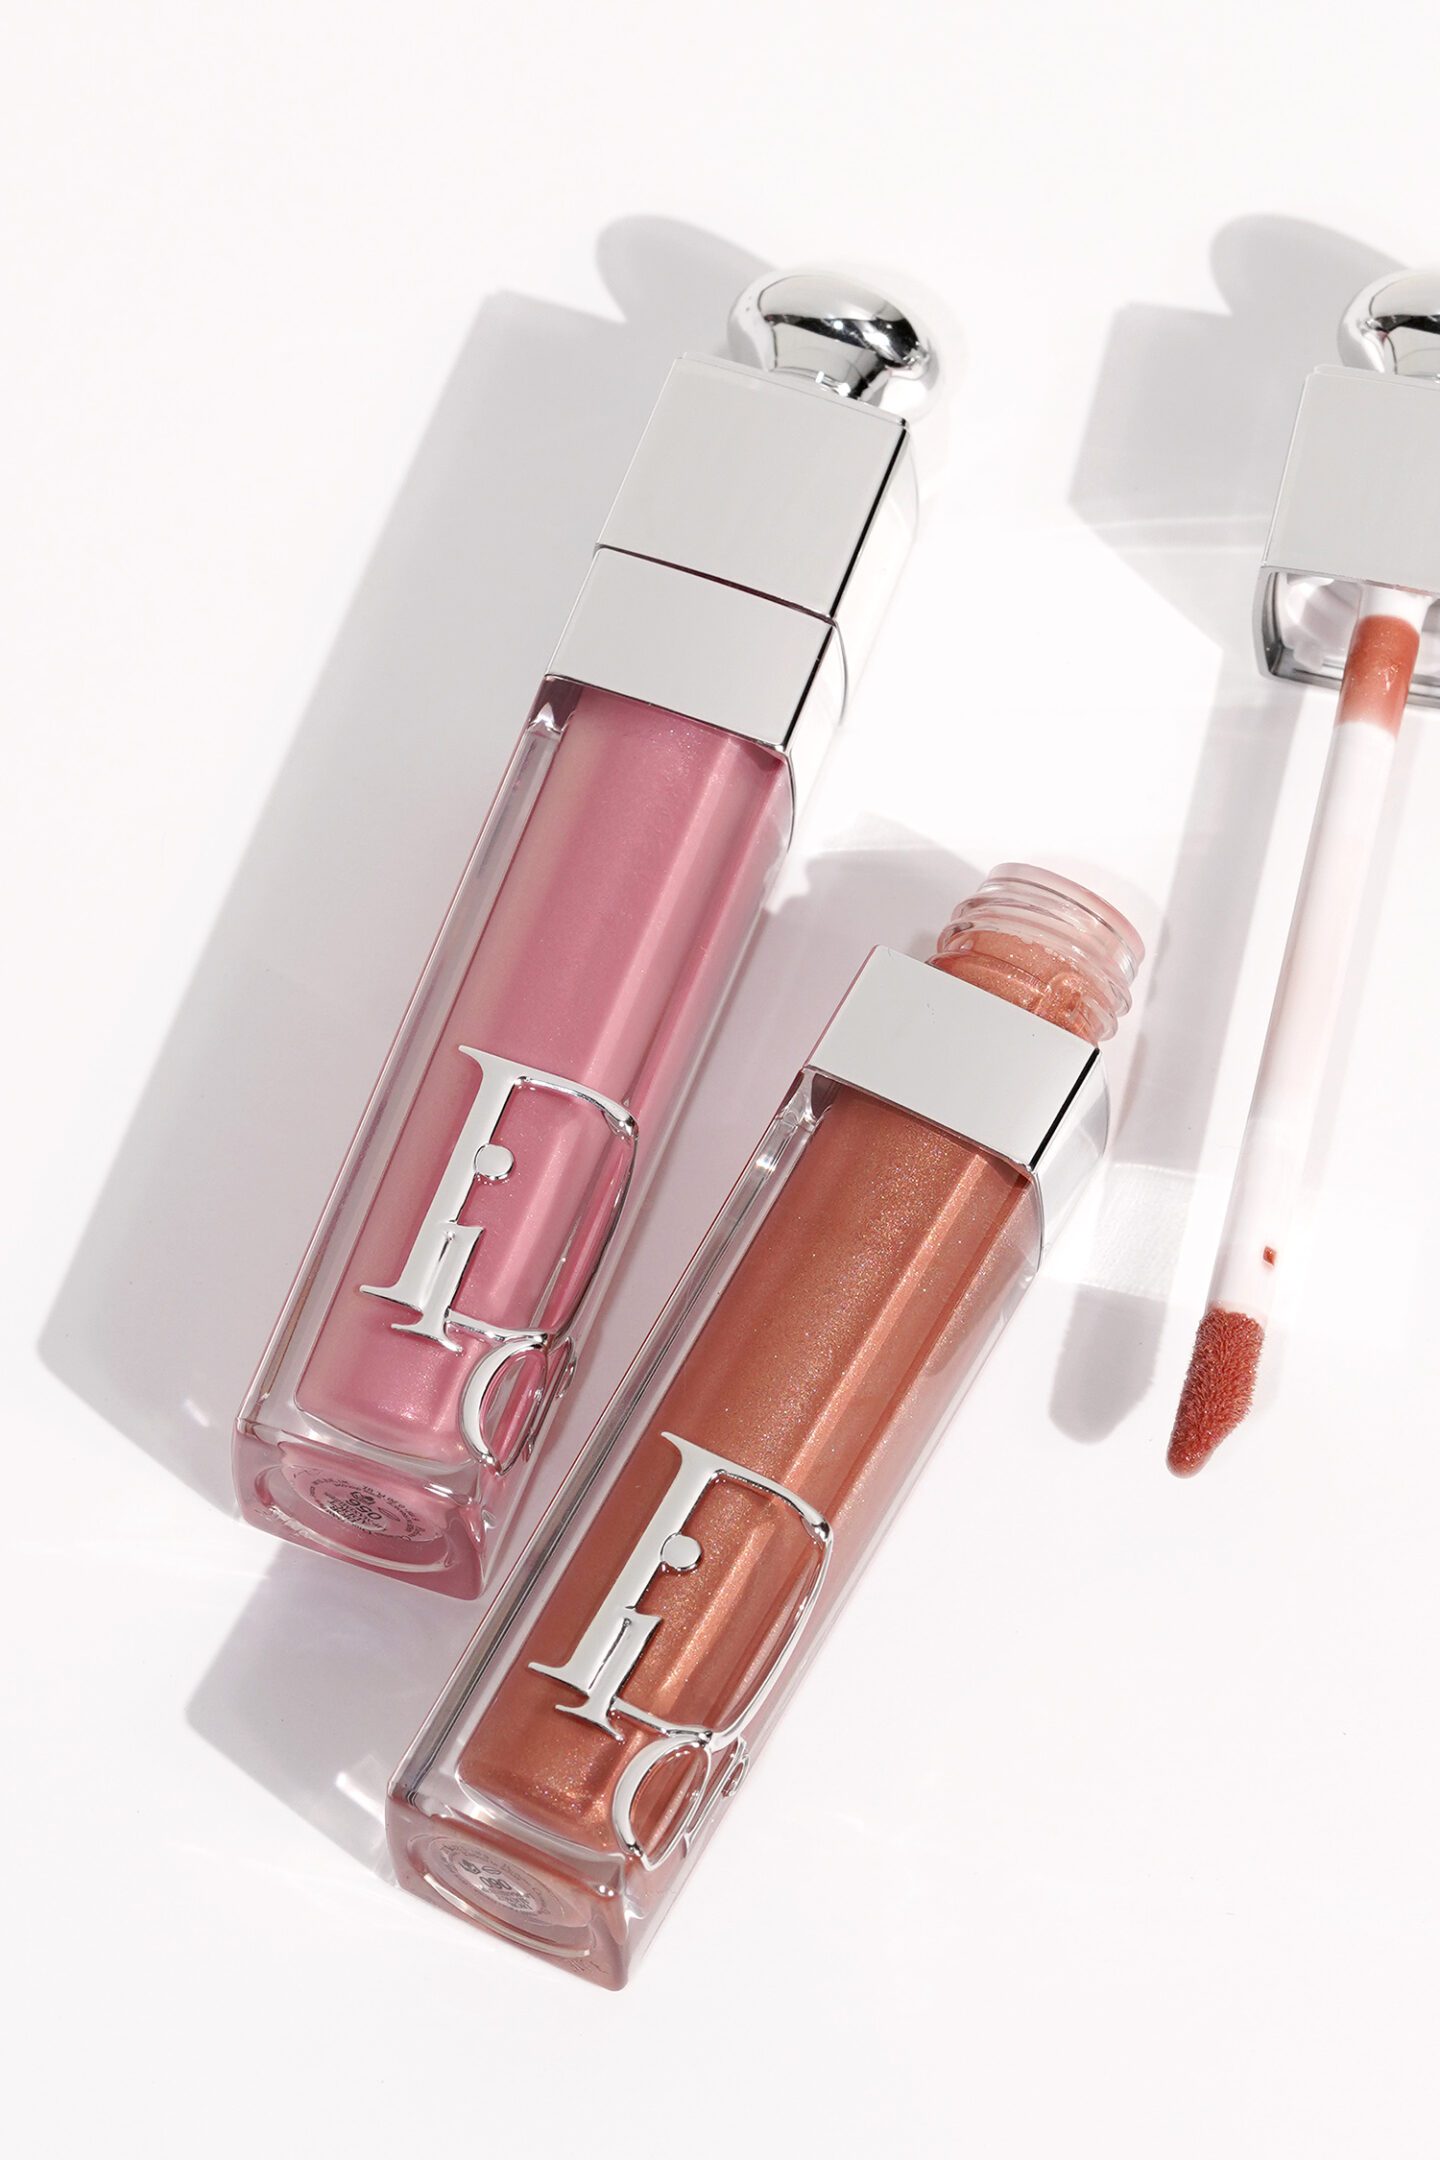 Dior Addict Lip Maximizer Frosted Pink and Shimmery Spice